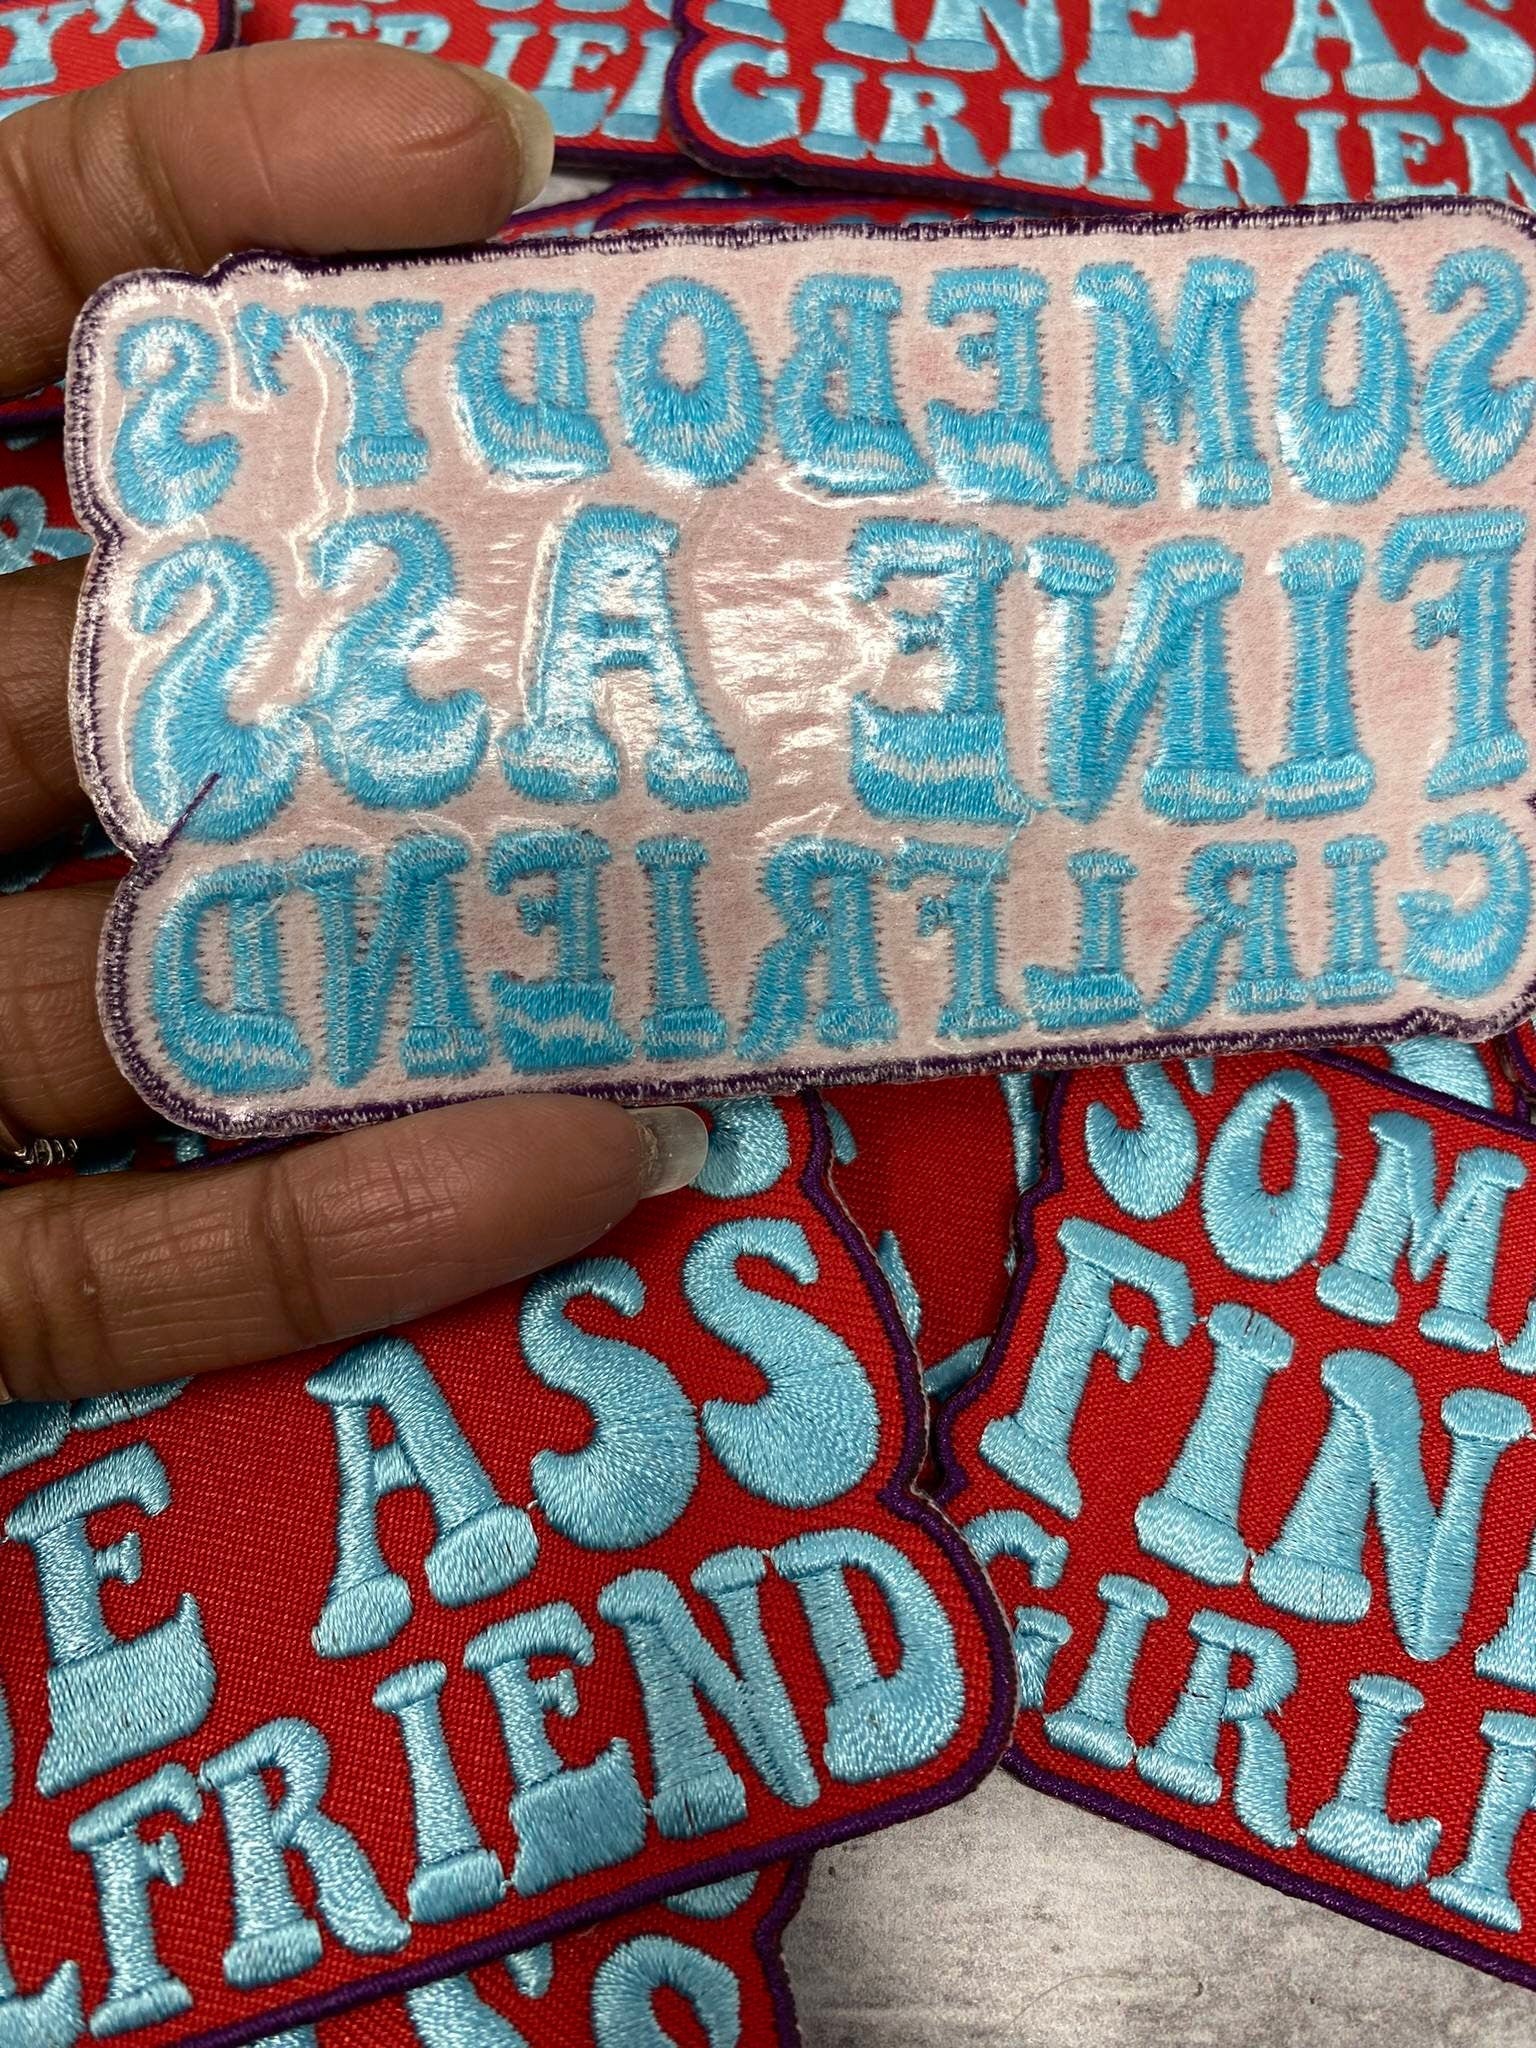 New, "Somebody's Fine Ass GIRLFRIEND" 1-pc, Iron-on Embroidered Patch, Cute Patch for Jackets, Hats, Crocs, Gifts for Mother, Funny Gifts